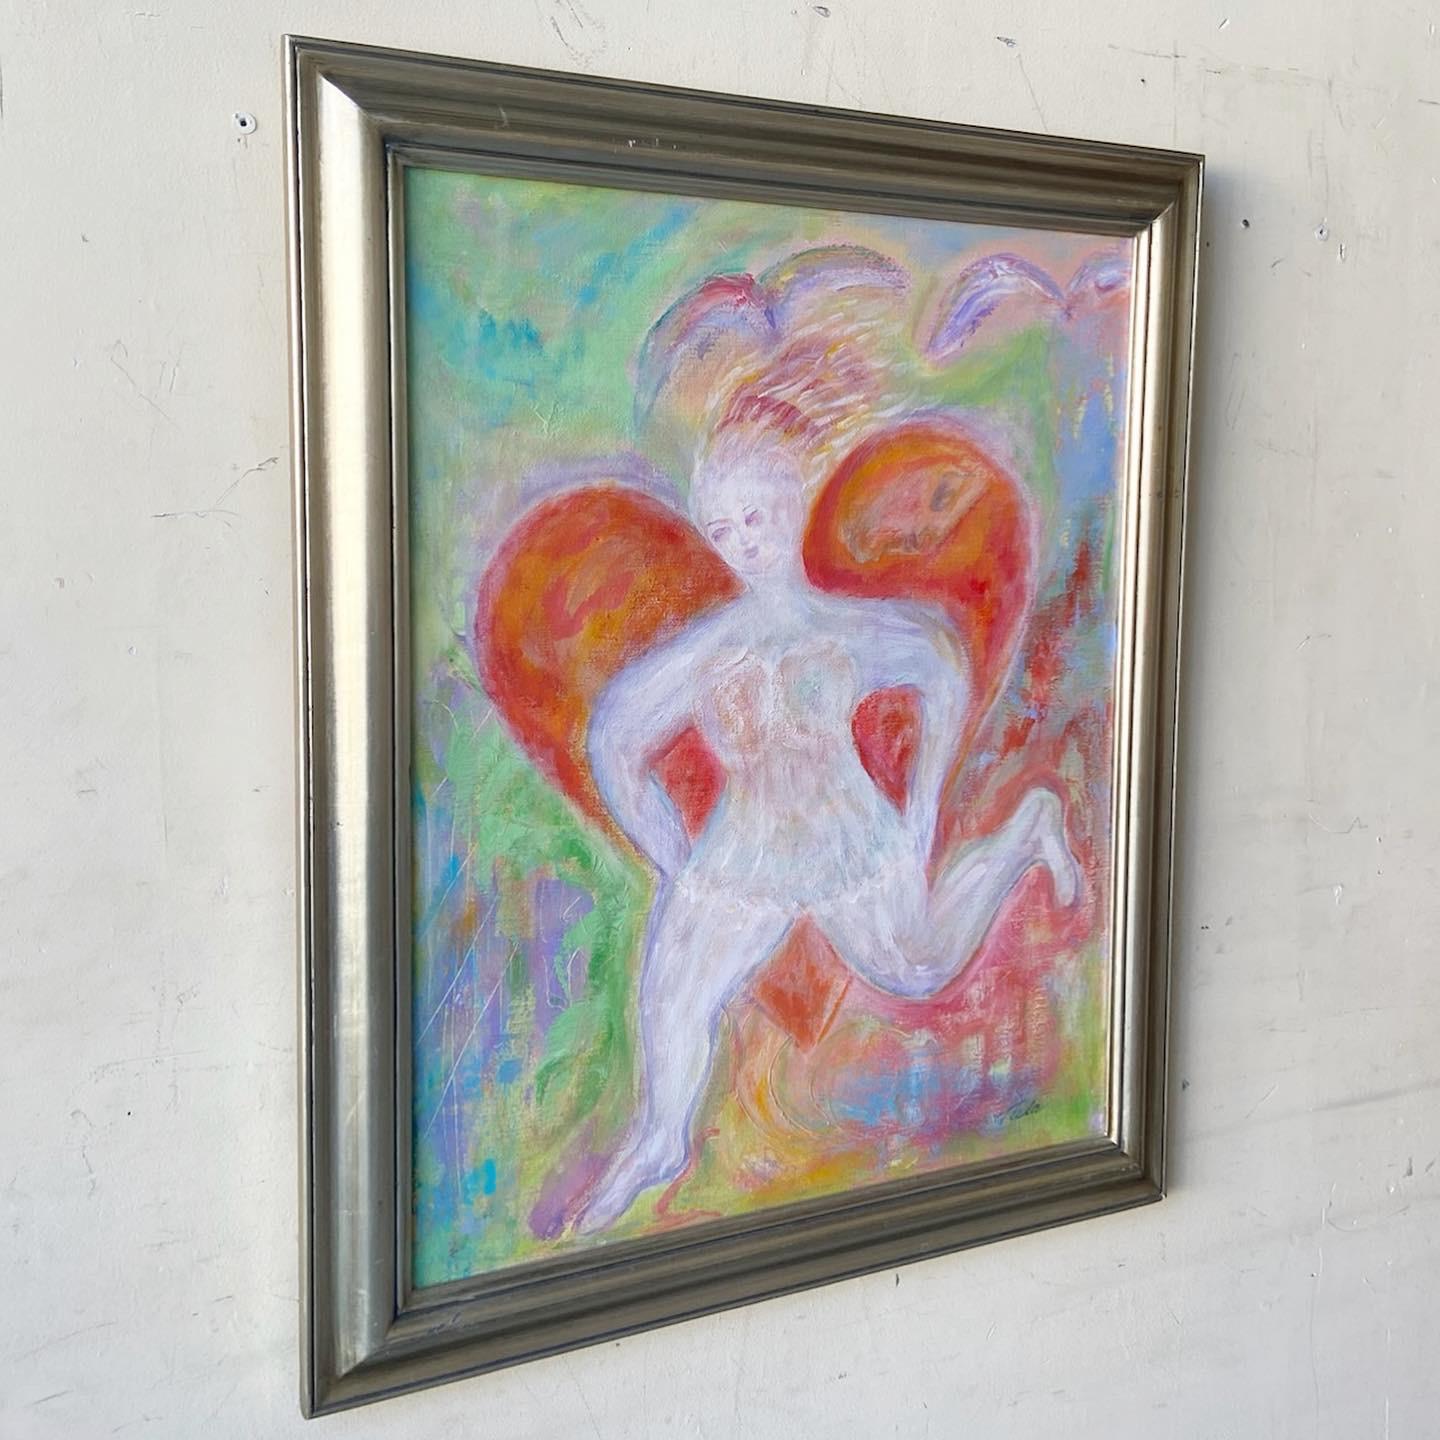 Exceptional vintage hand painted and signed framed art work. Signed by “Tula” the subject is a nude women backed by a heart and an abstract colorful setting.